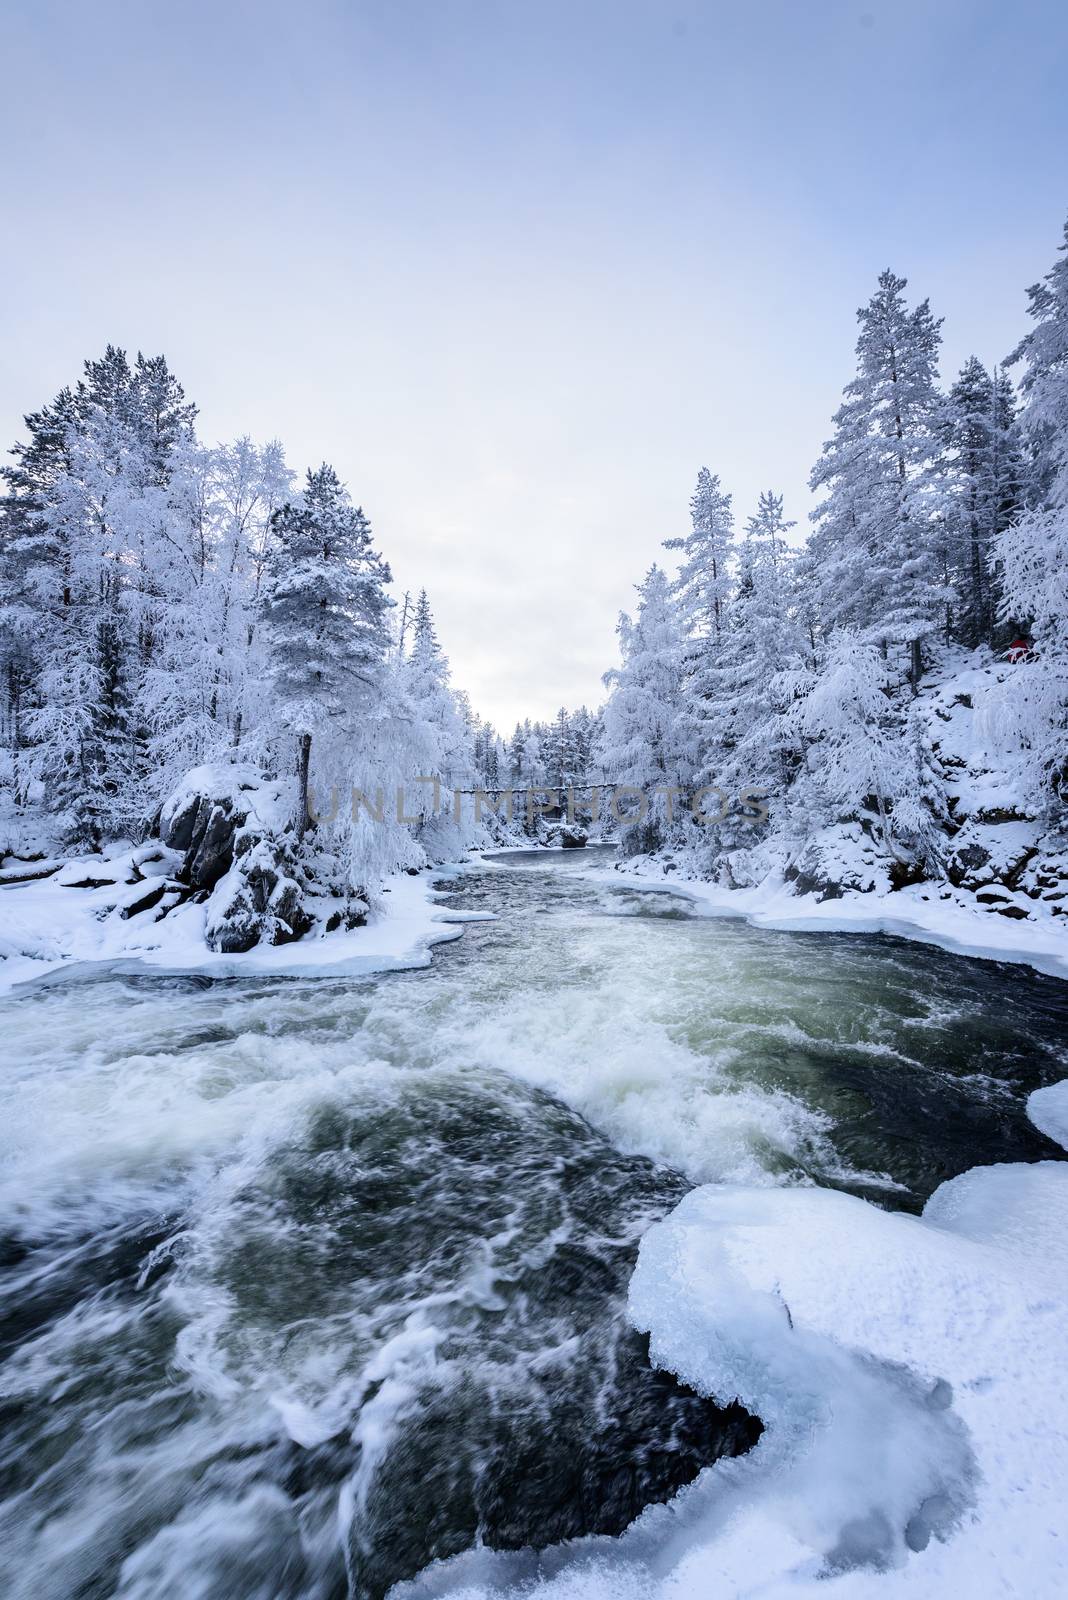 The river in winter season at Oulanka National Park, Finland. by animagesdesign